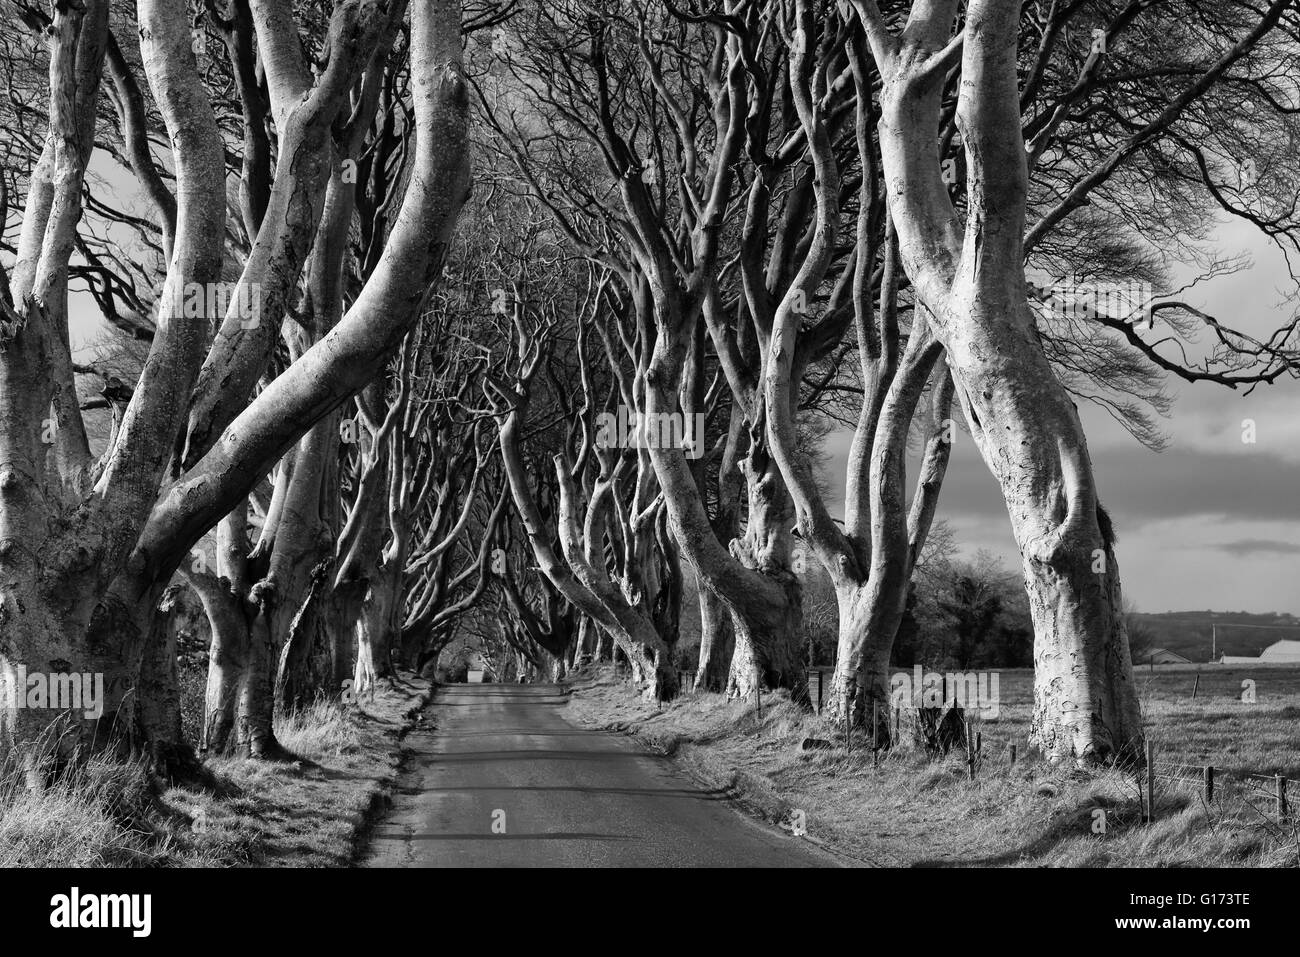 The Dark Hedges near Ballymoney, Co. Antrim, Northern Ireland.  Feautured in the Game of Thrones as the Kings Road. Stock Photo